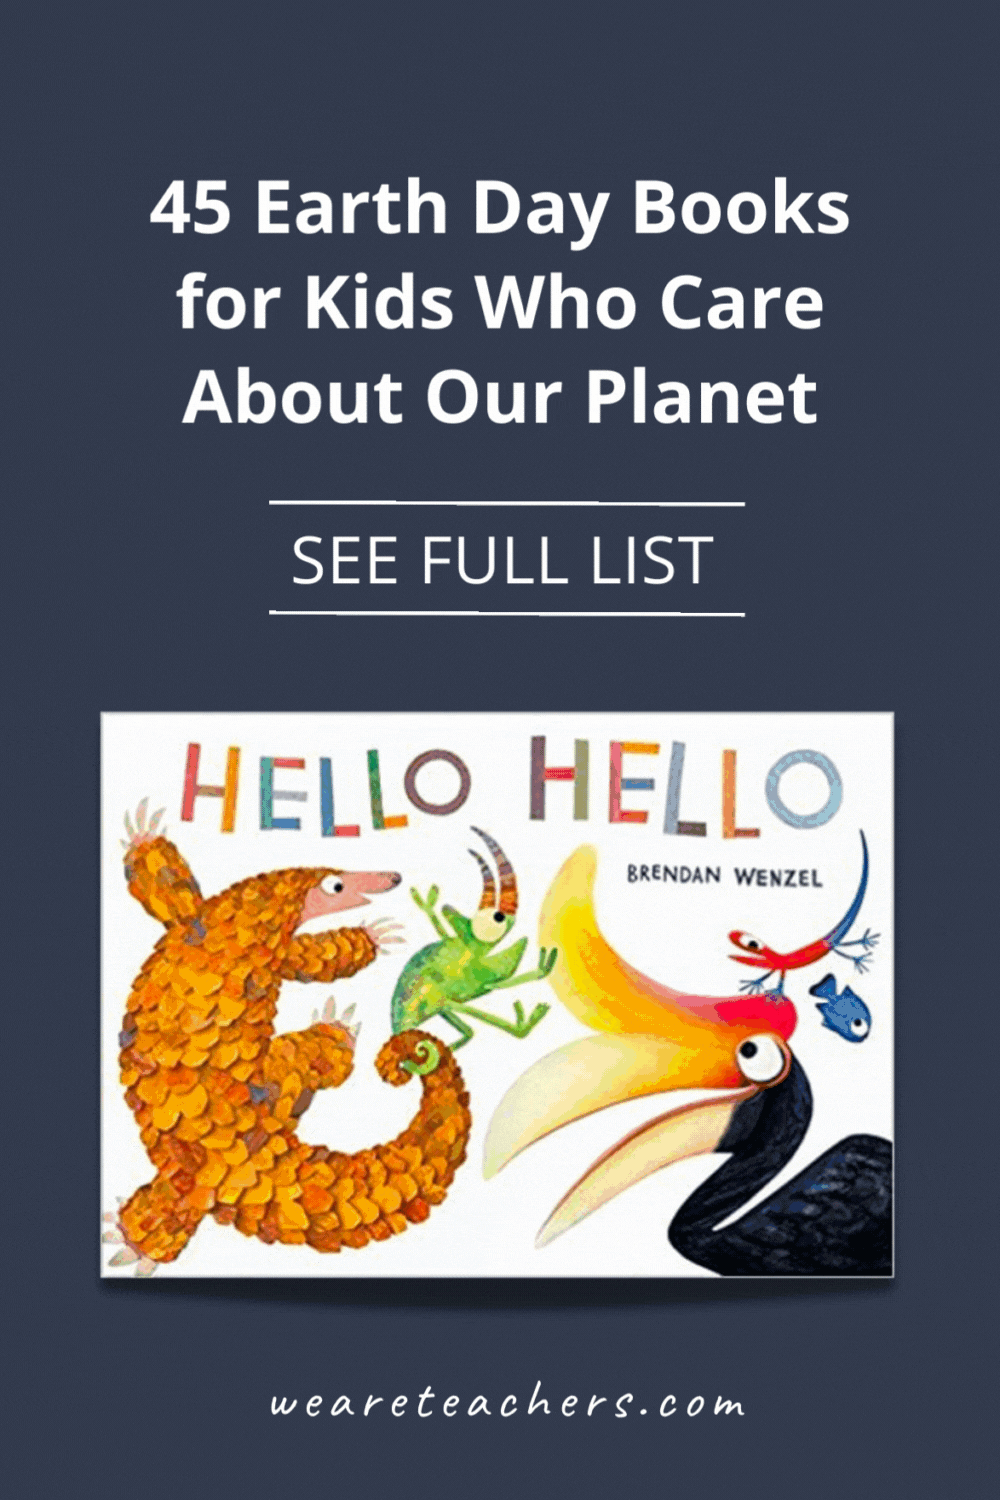 Check out this updated list of Earth Day books for kids about animals, plants, ecosystems, sustainability, and more!